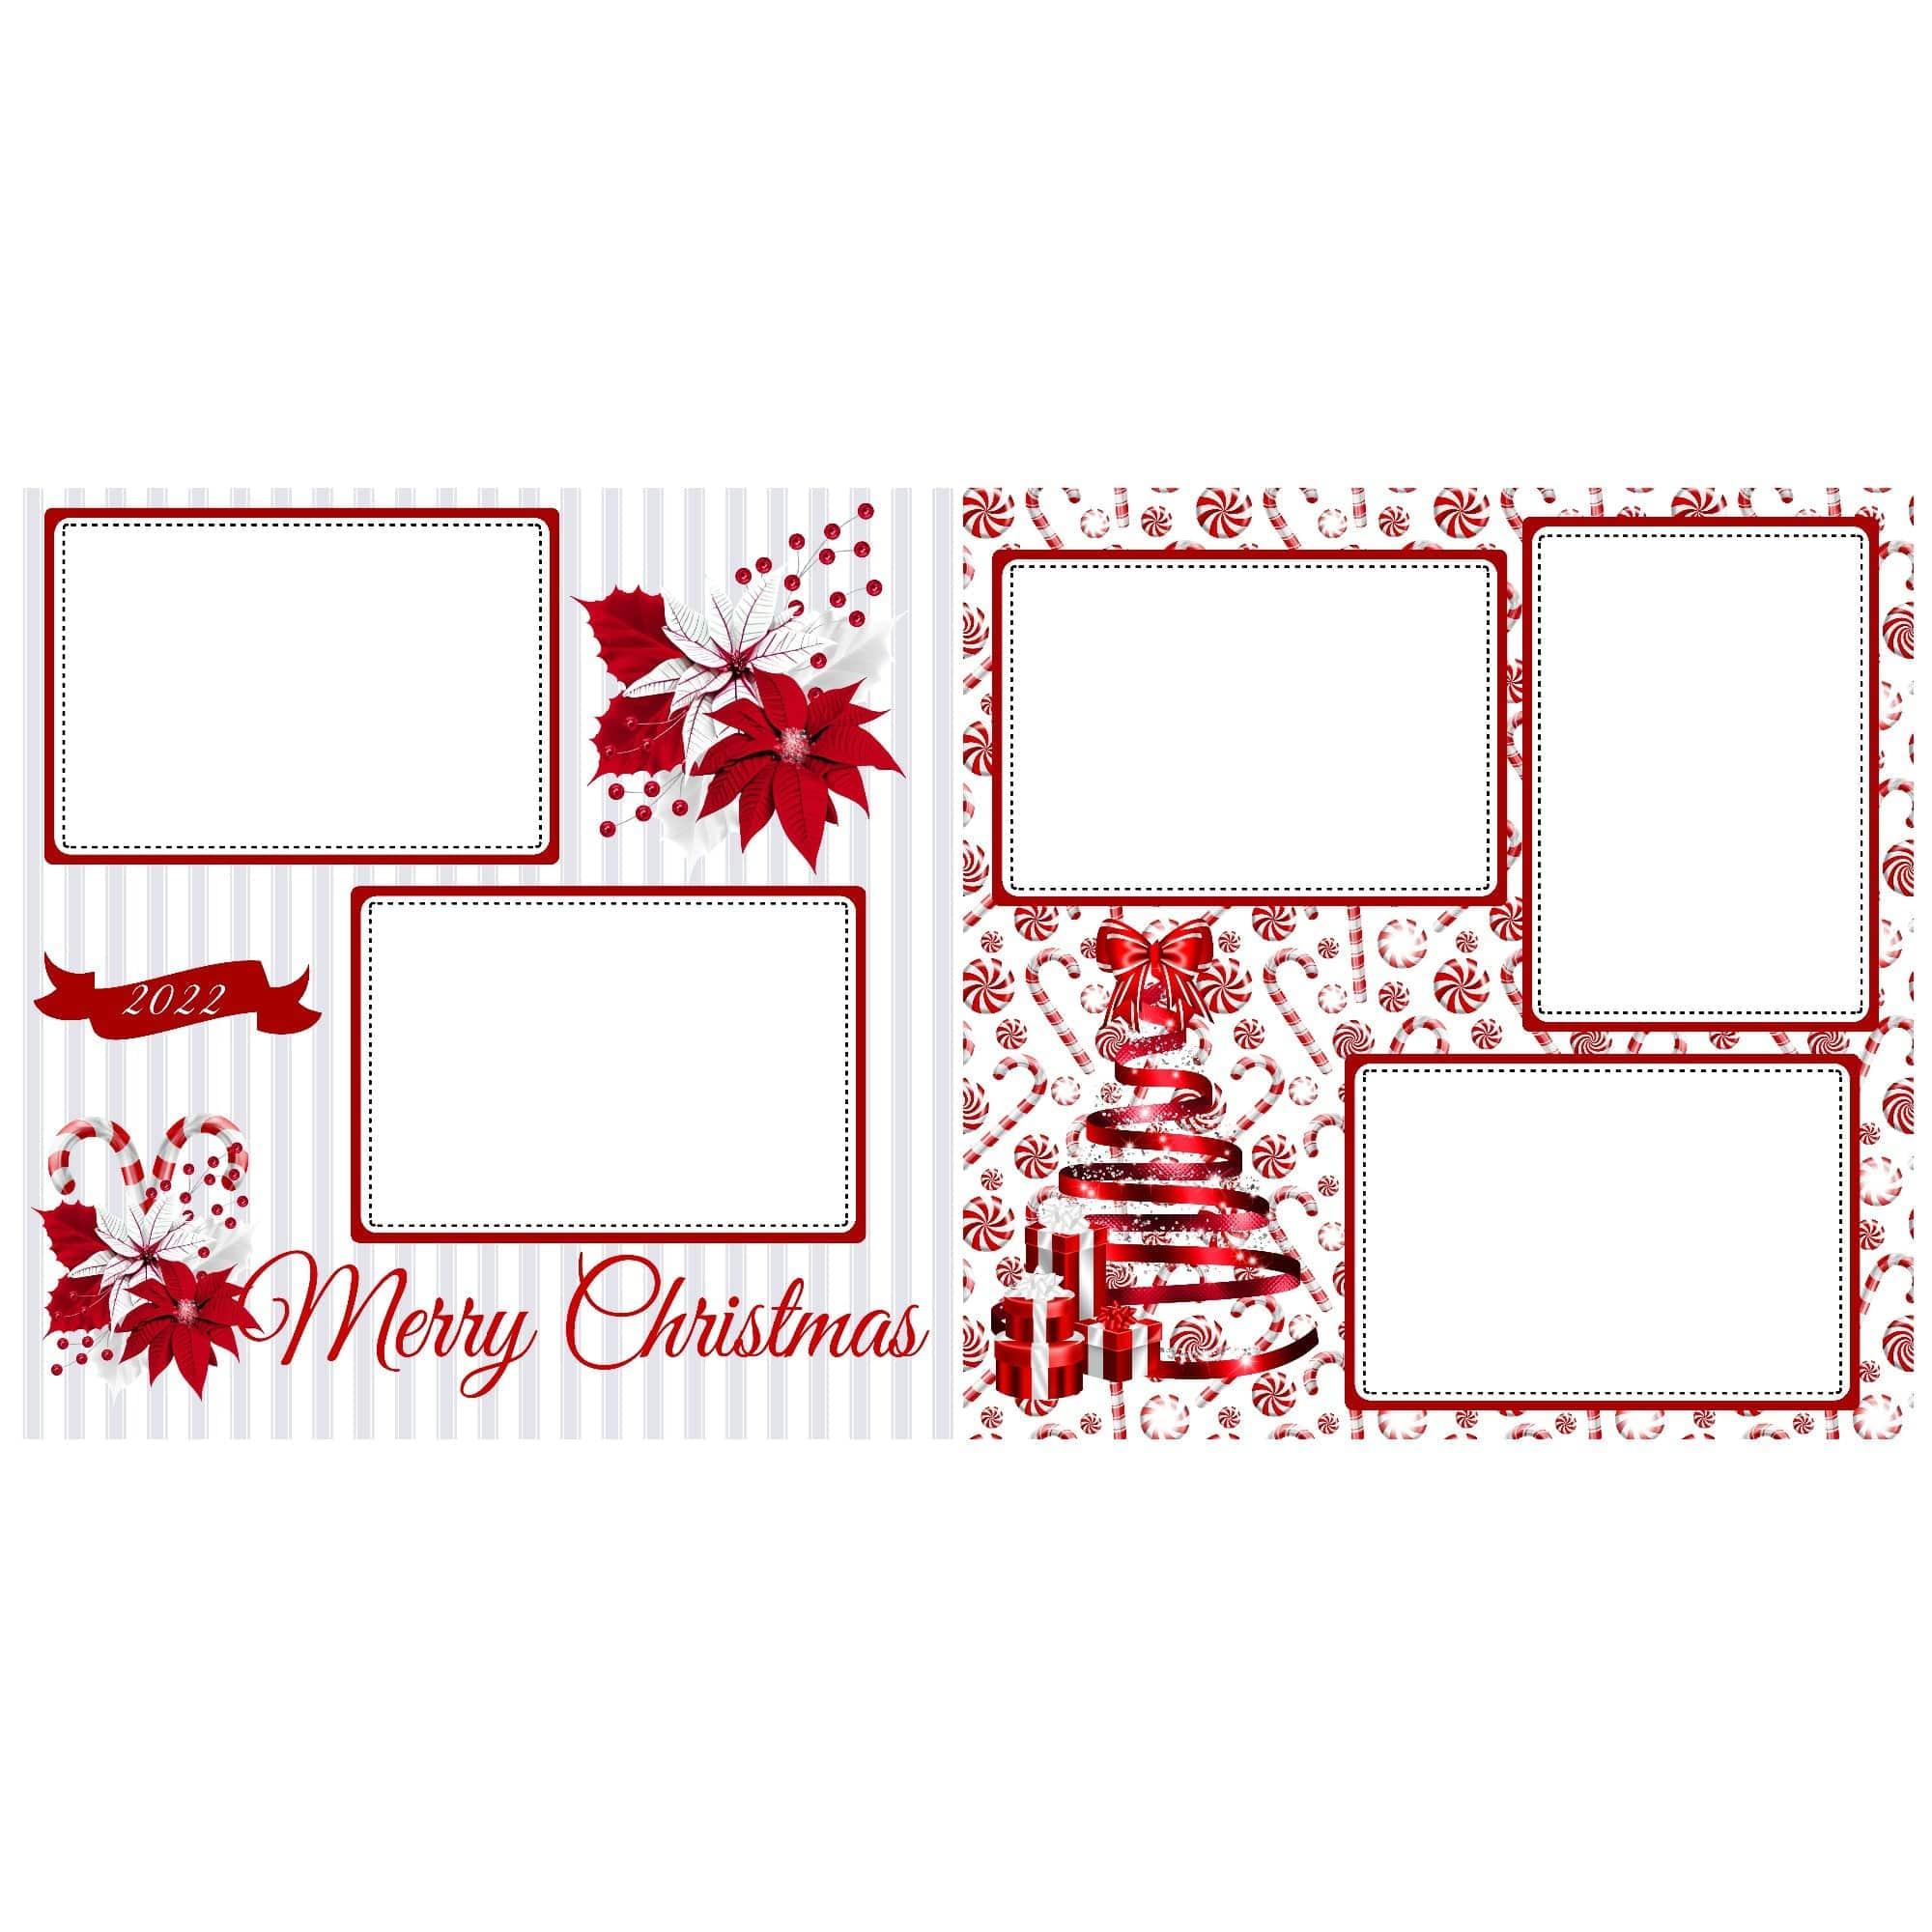 Peppermint Christmas 2022 (2) - 12 x 12 Premade, Printed Scrapbook Pages by SSC Designs